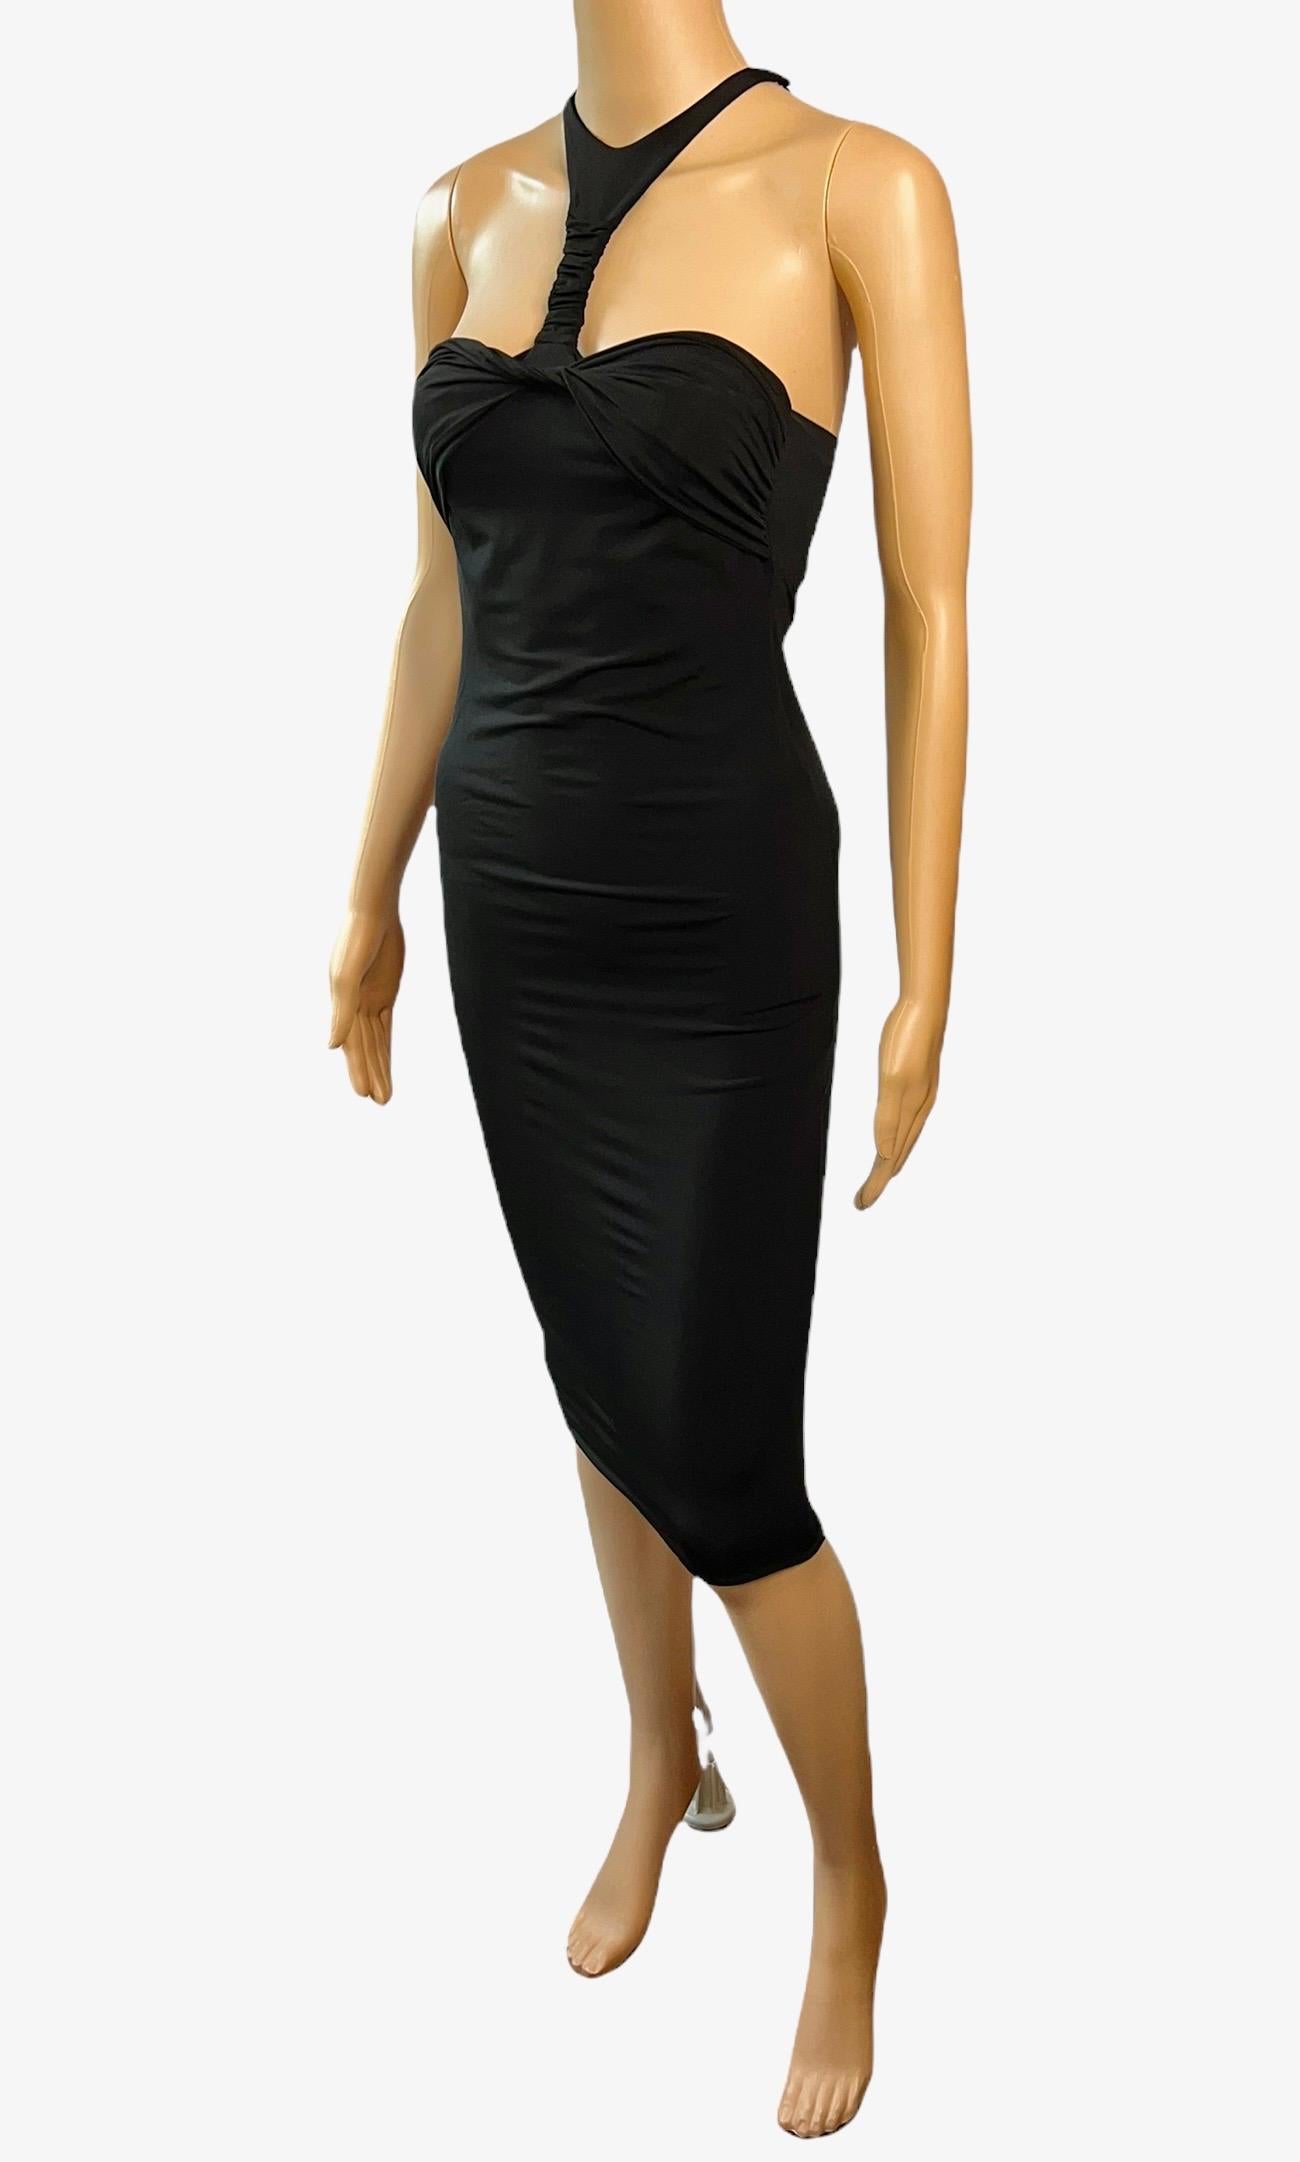 Tom Ford for Gucci F/W 2004 Plunging Cutout Black Evening Dress  For Sale 2